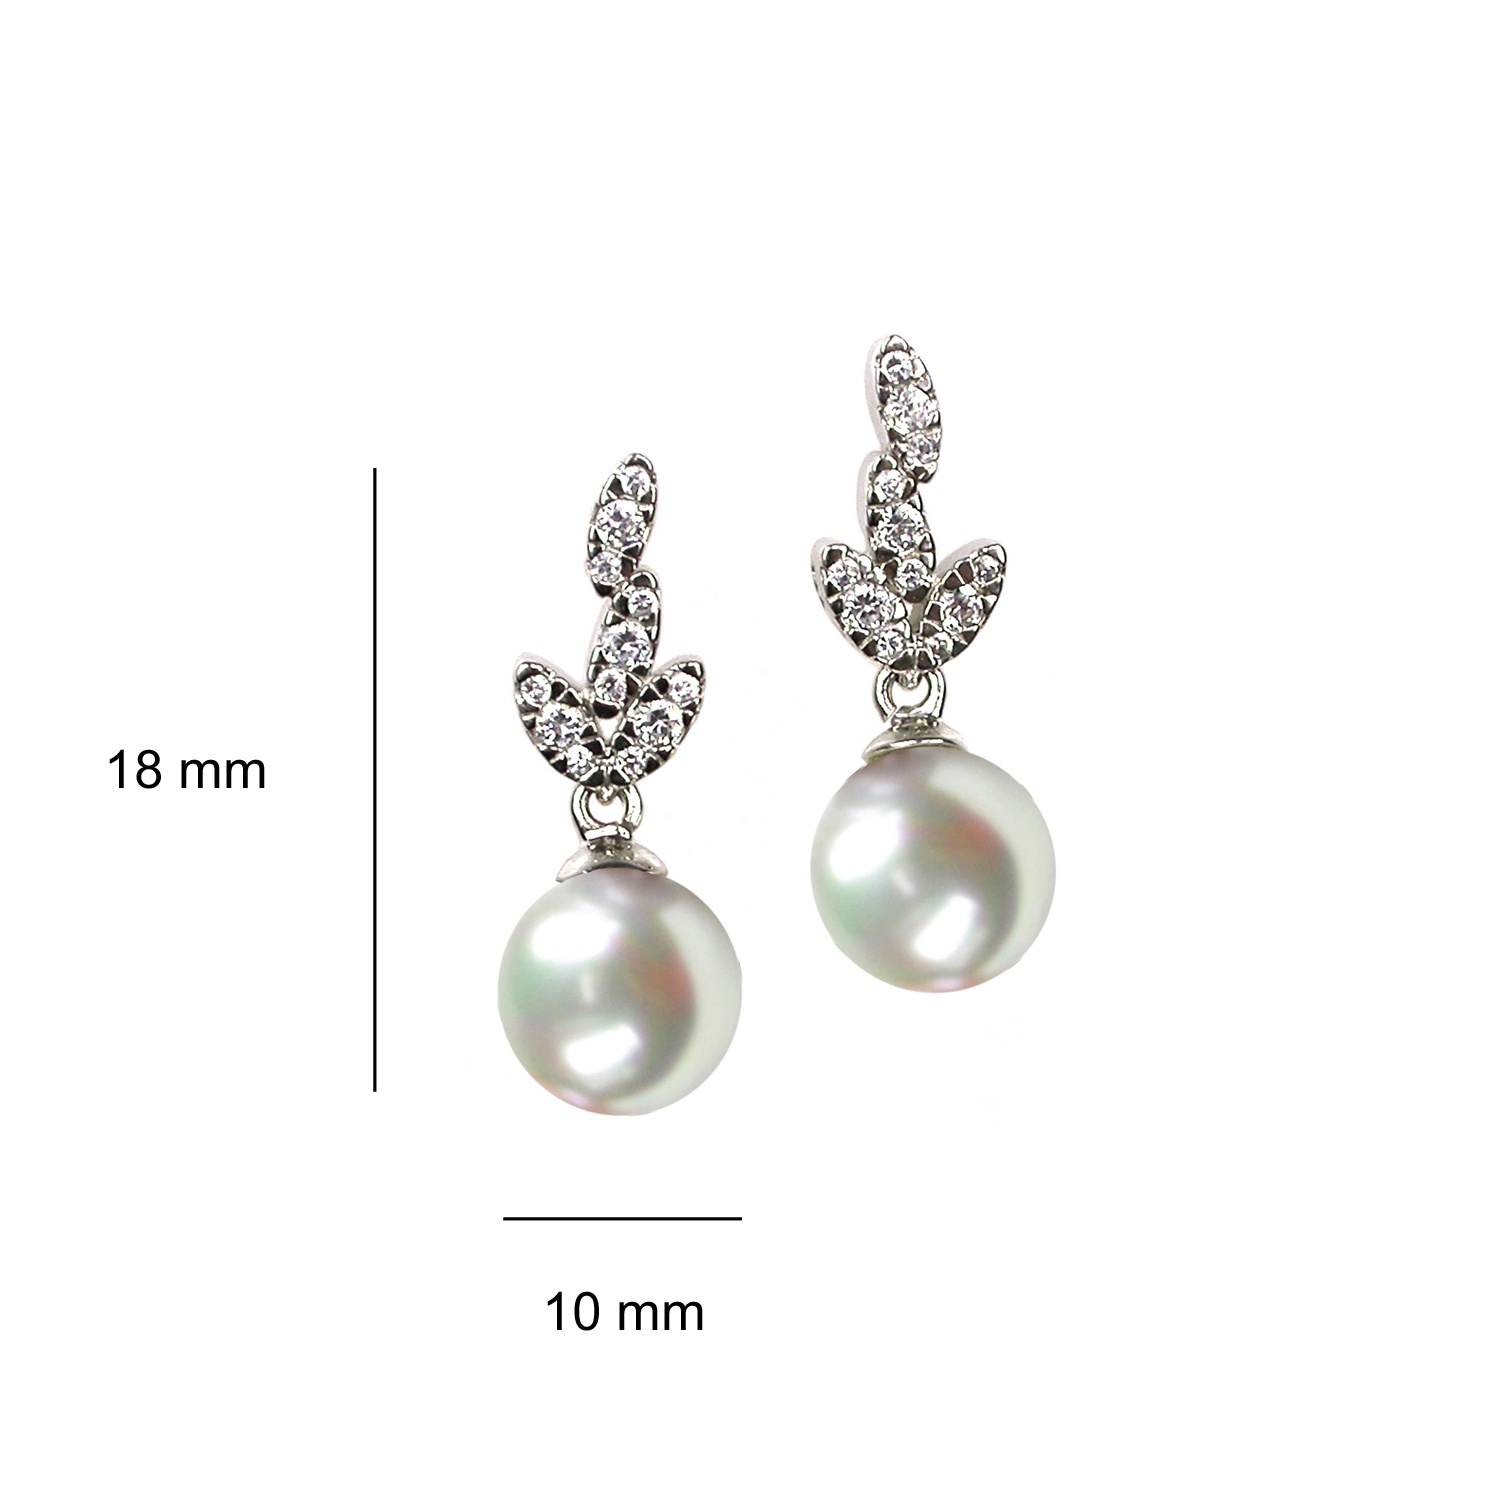 Silver Earrings with Pearls. 3